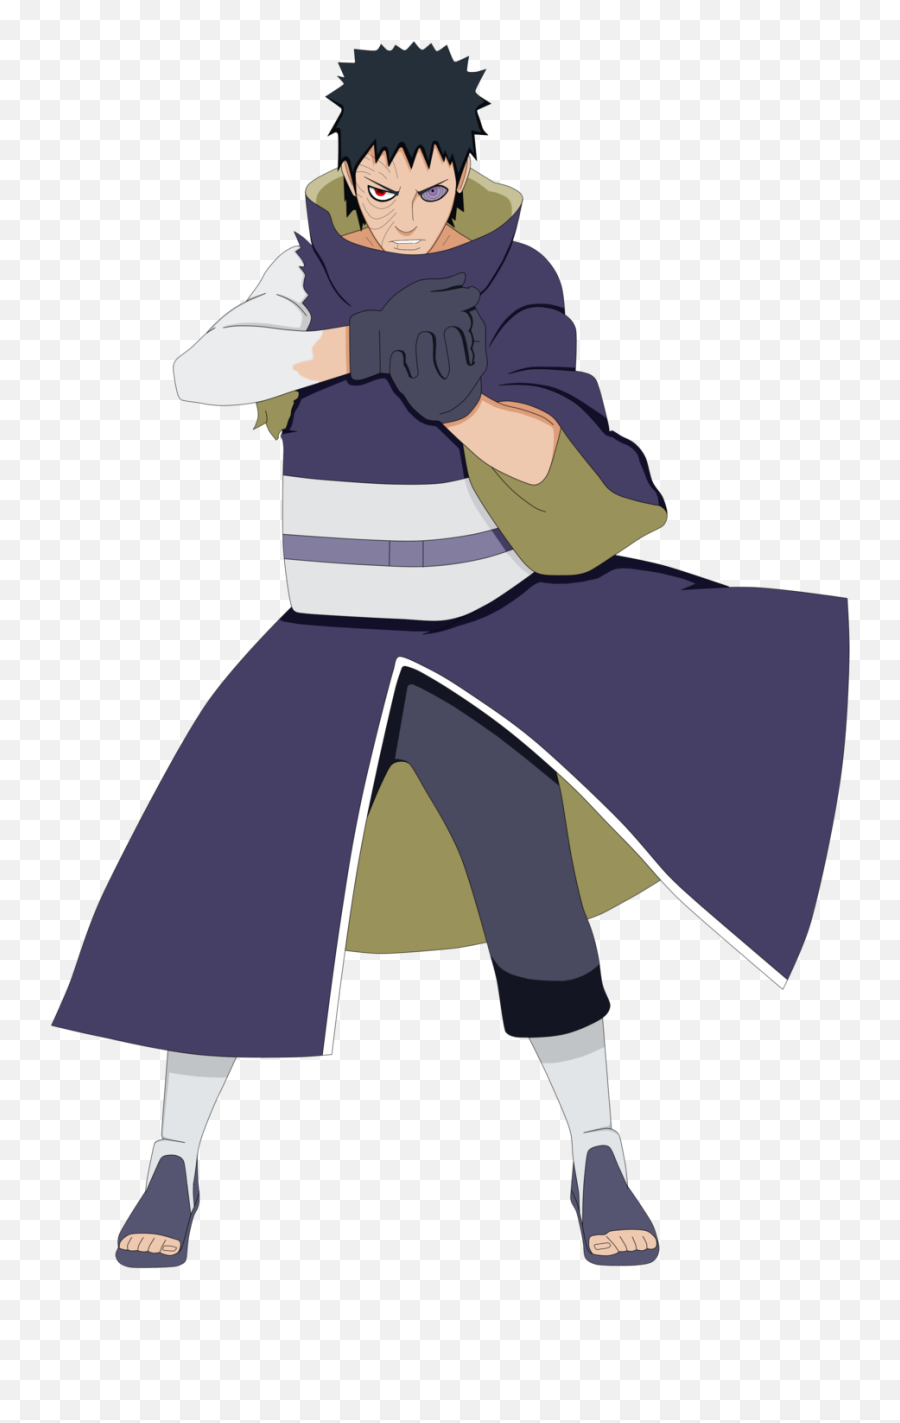 Obito Png U0026 Free Obitopng Transparent Images 39178 - Pngio Uchiha Obito Png,Rinnegan Png